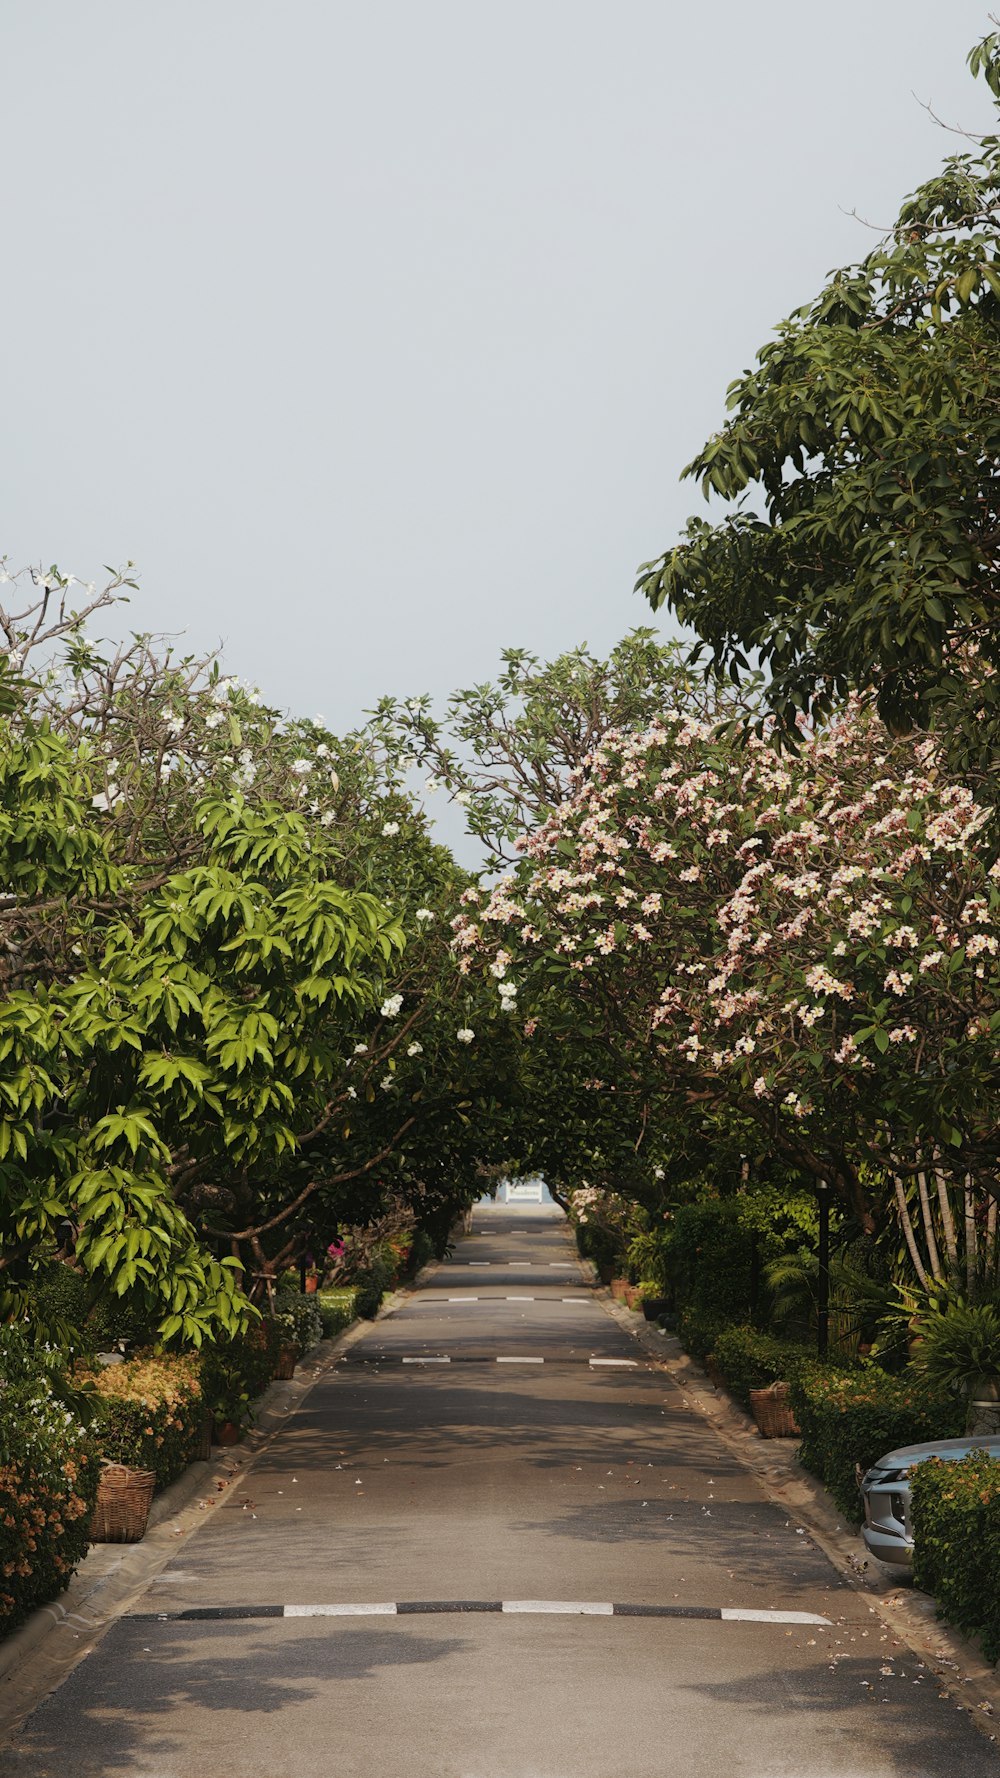 a long road lined with trees and bushes